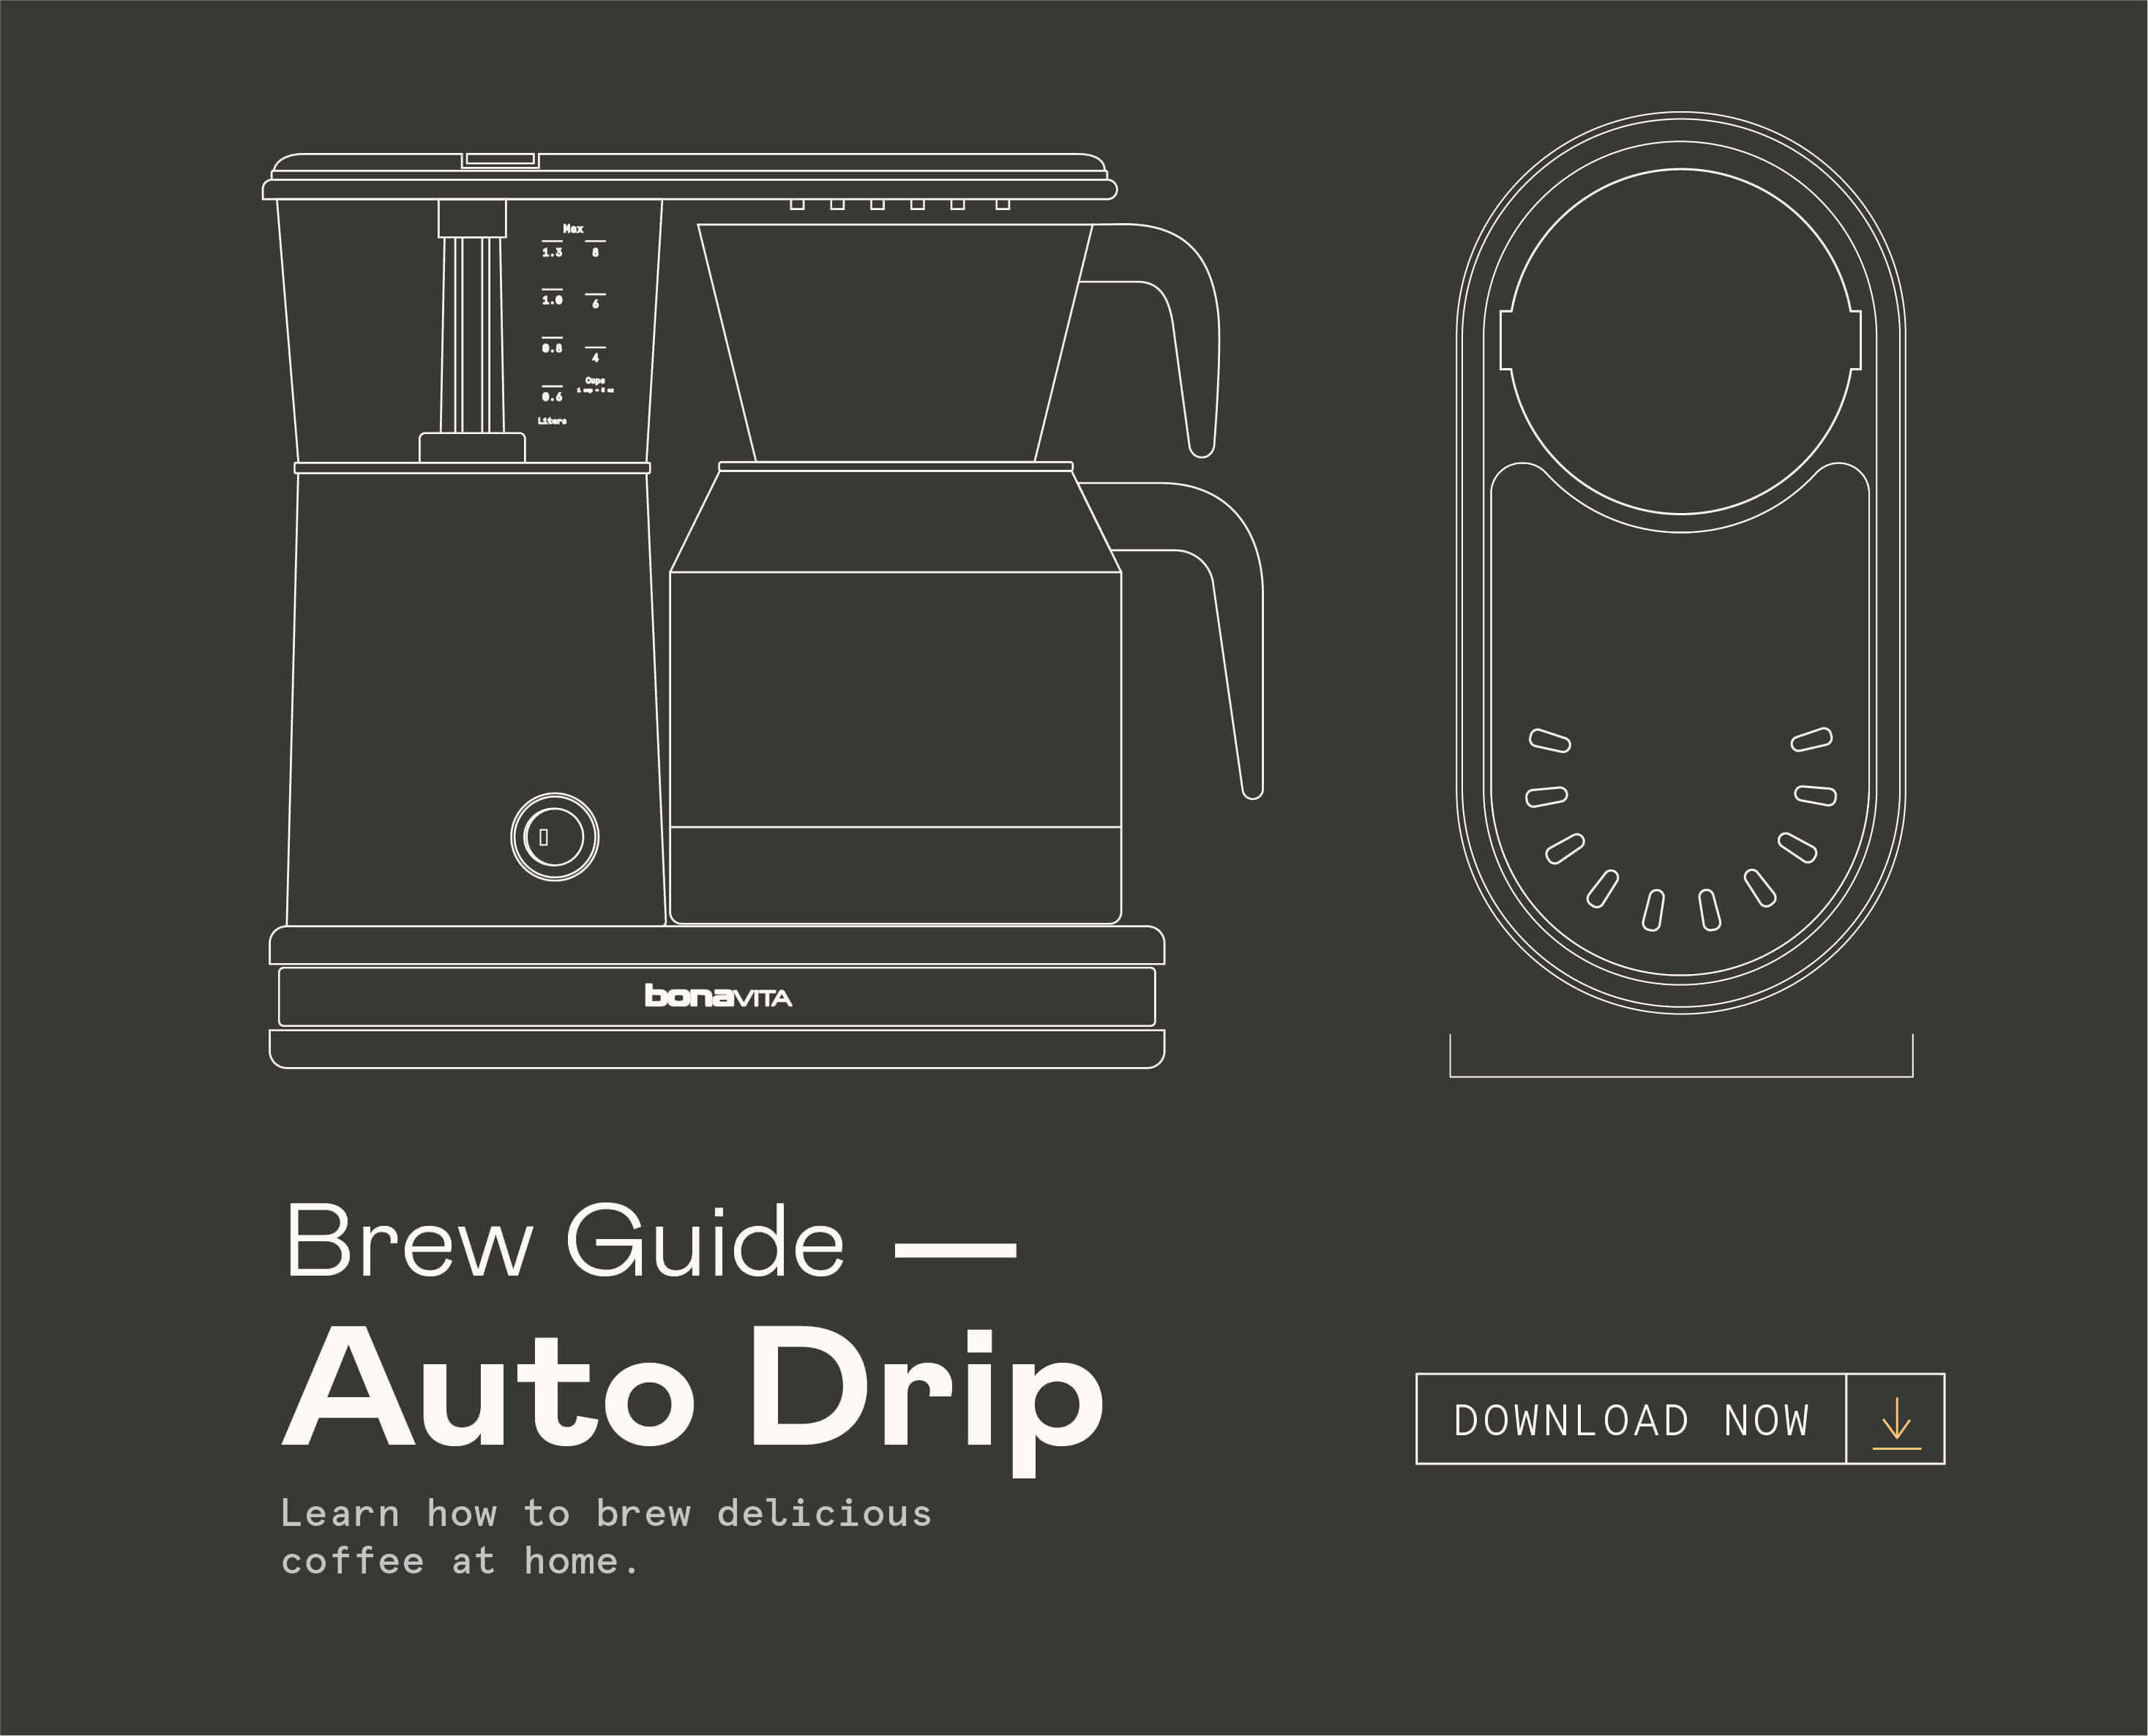 How to Brew with a Drip Brewer